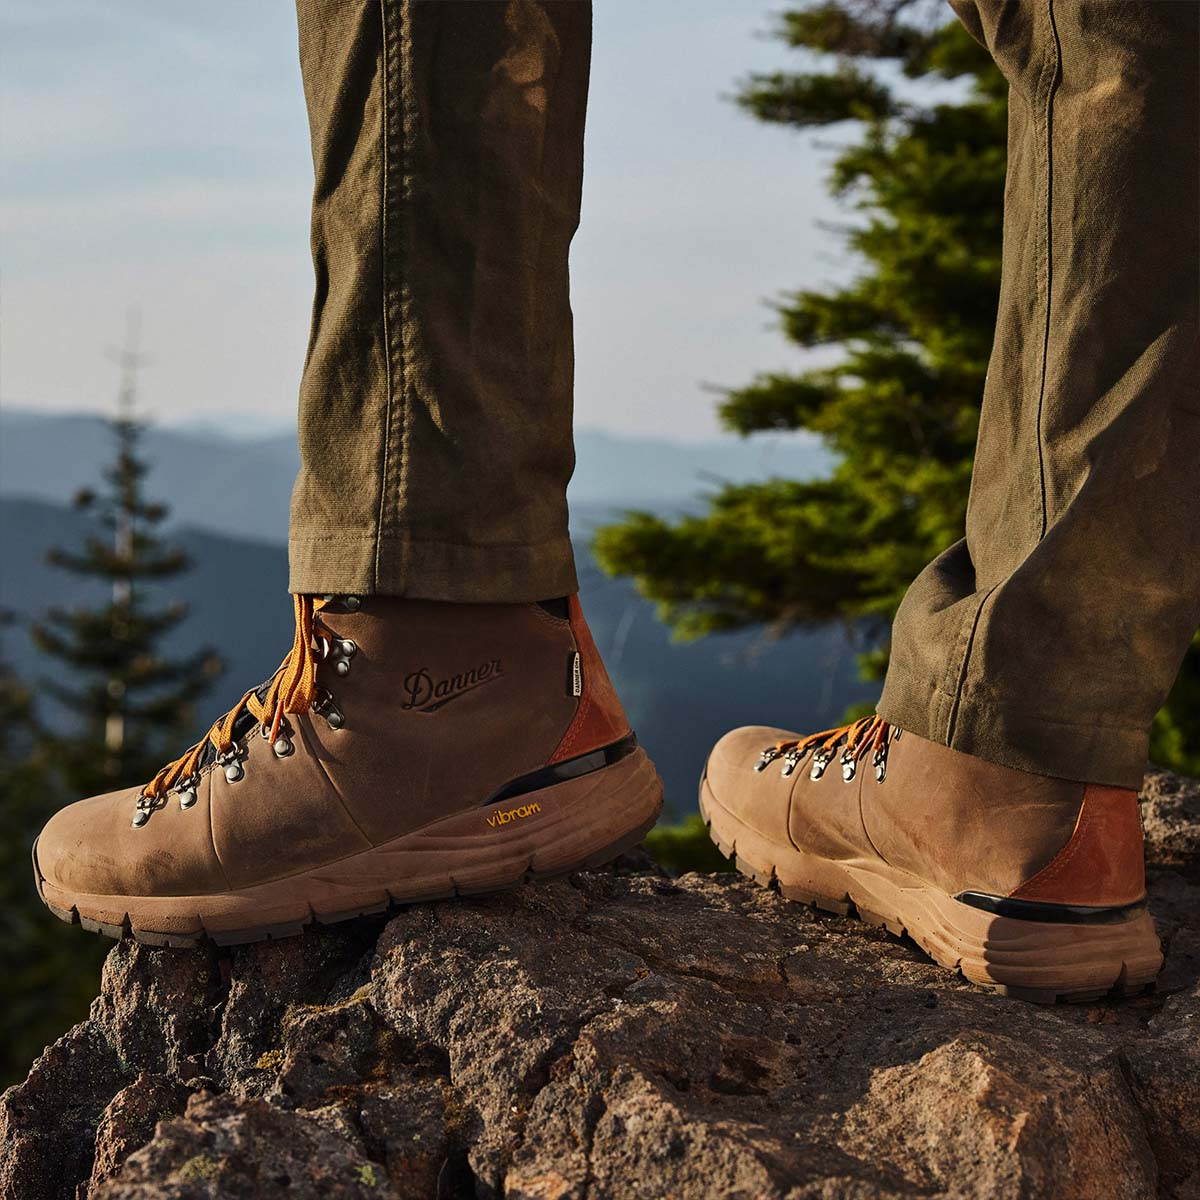 Danner Mountain 600 Boot Rich Brown, perfect boots for walking nature